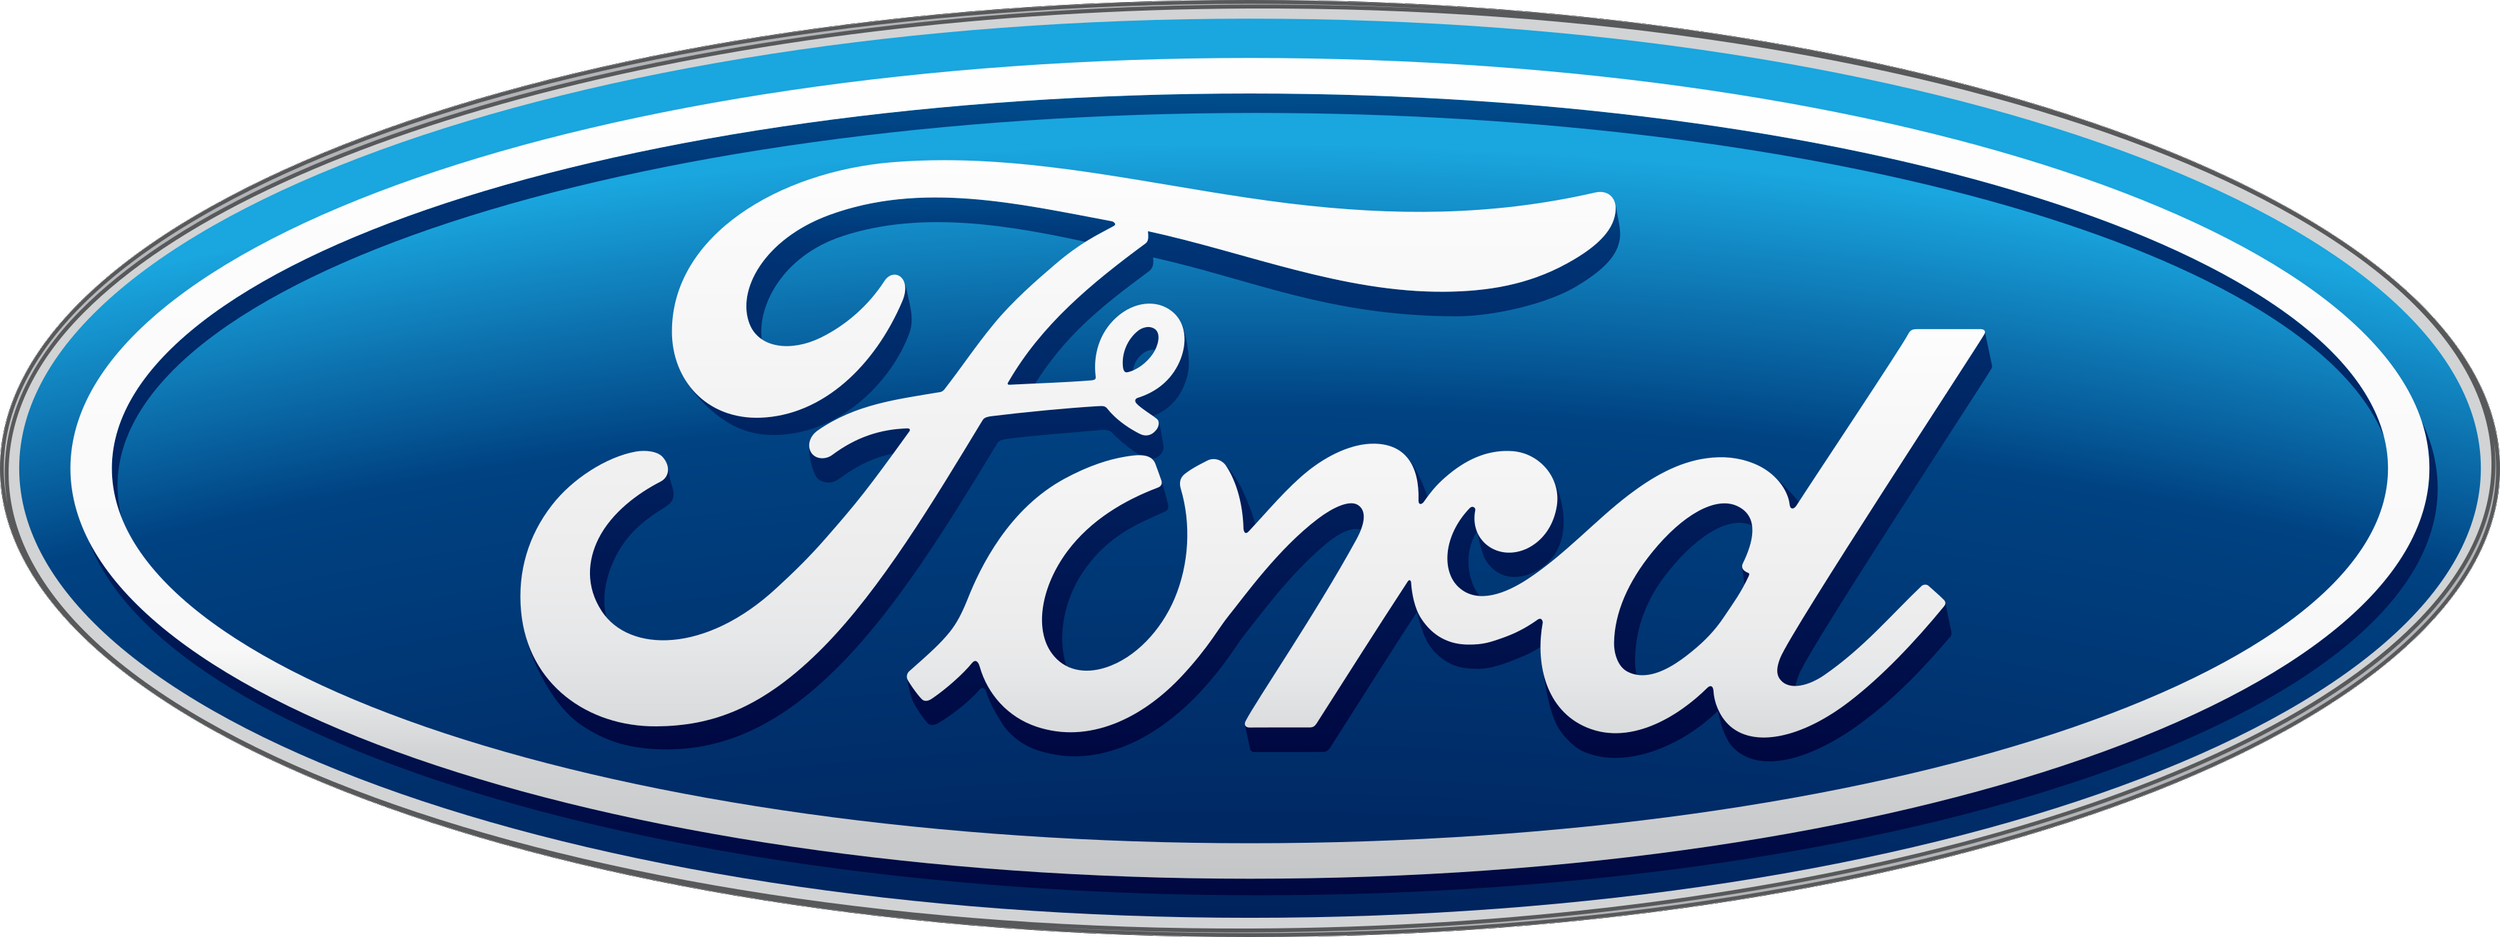 ford-logo-1.png